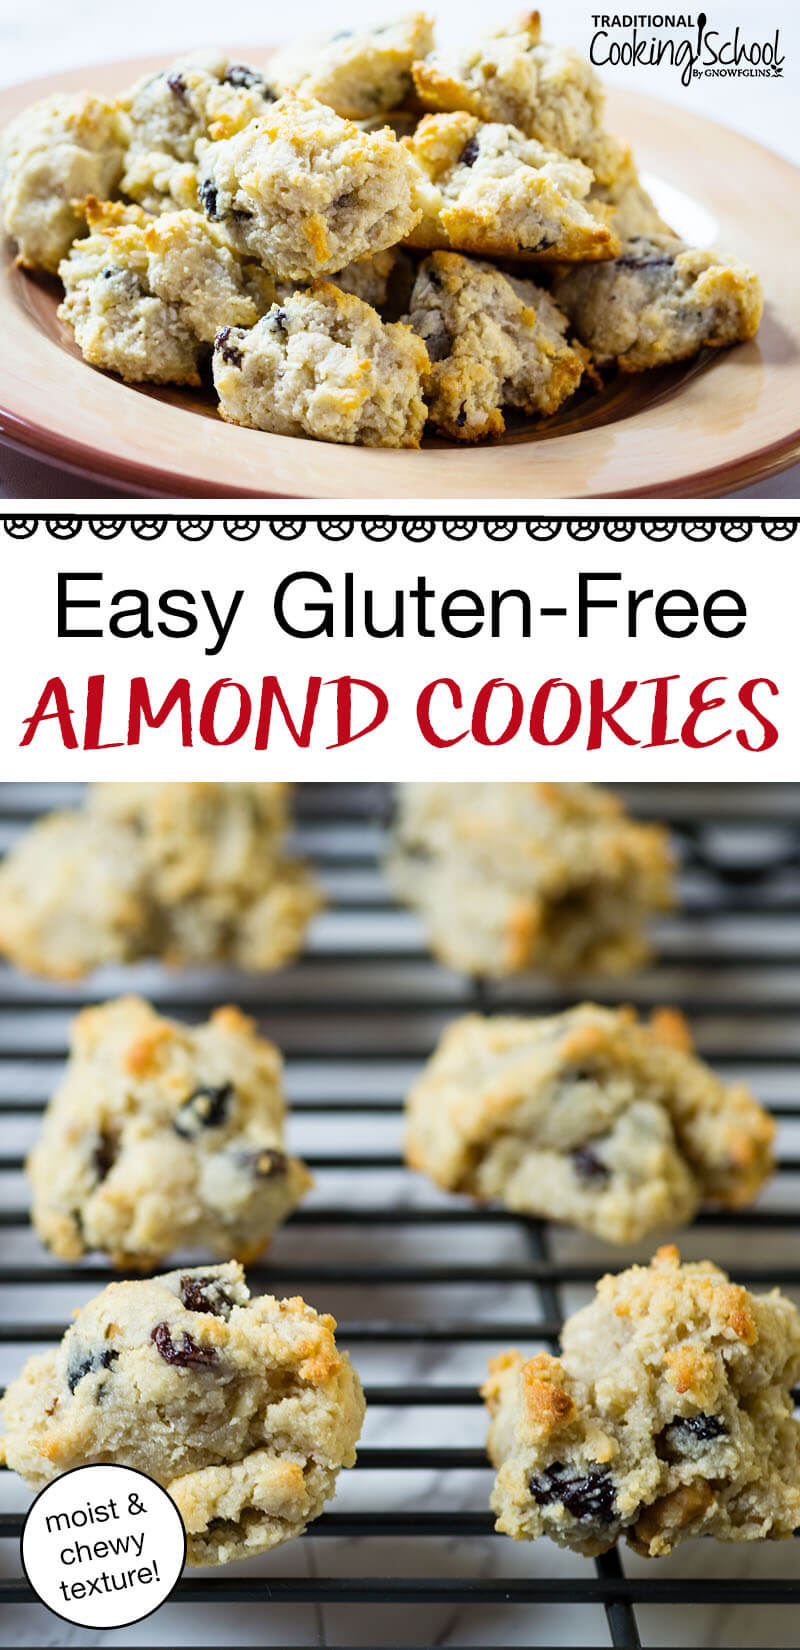 Longer Pinterest pin with almond cookies on cooling rack and a plate of almond cookies. Text overlay, "Easy Gluten-Free Almond Cookies: moist & chewy texture!"